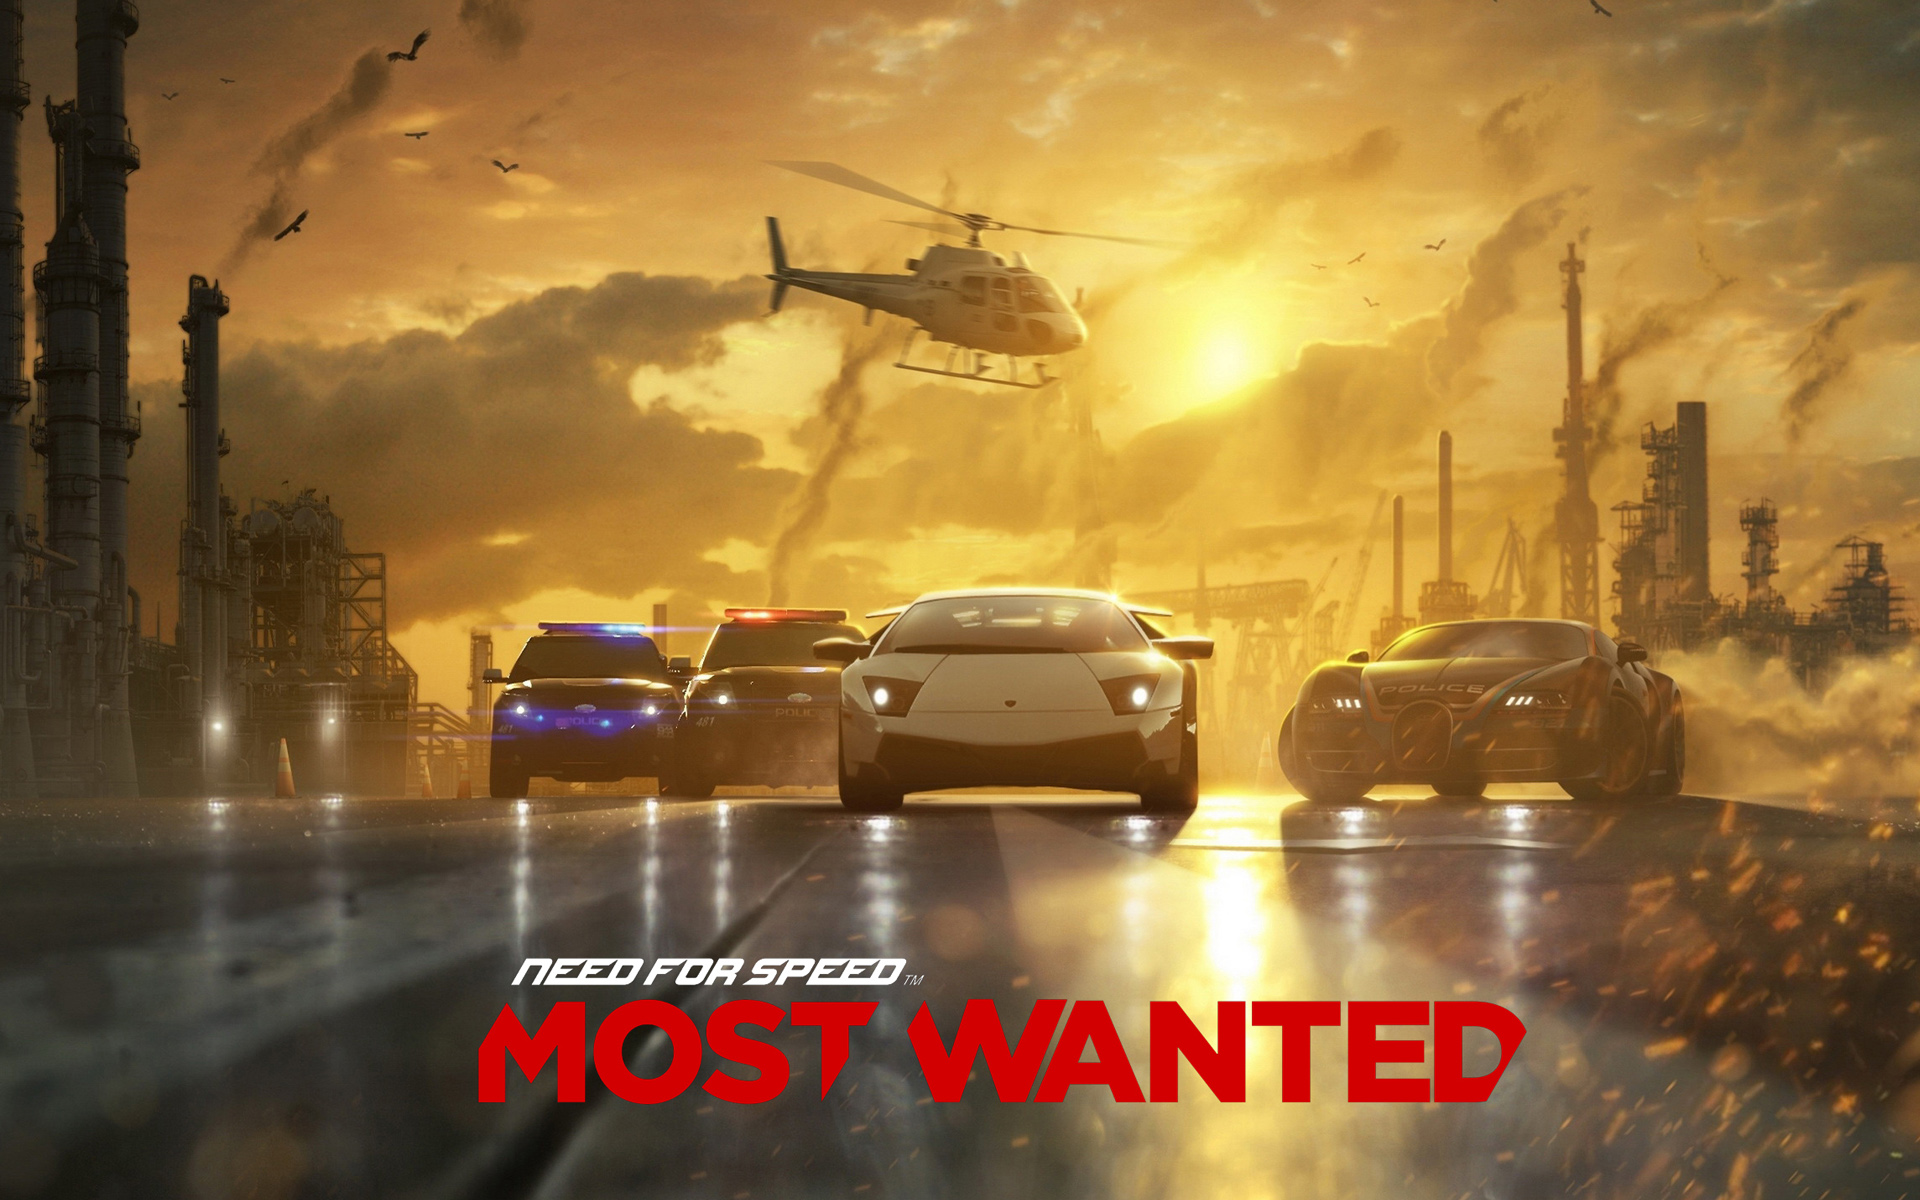 most wanted wii